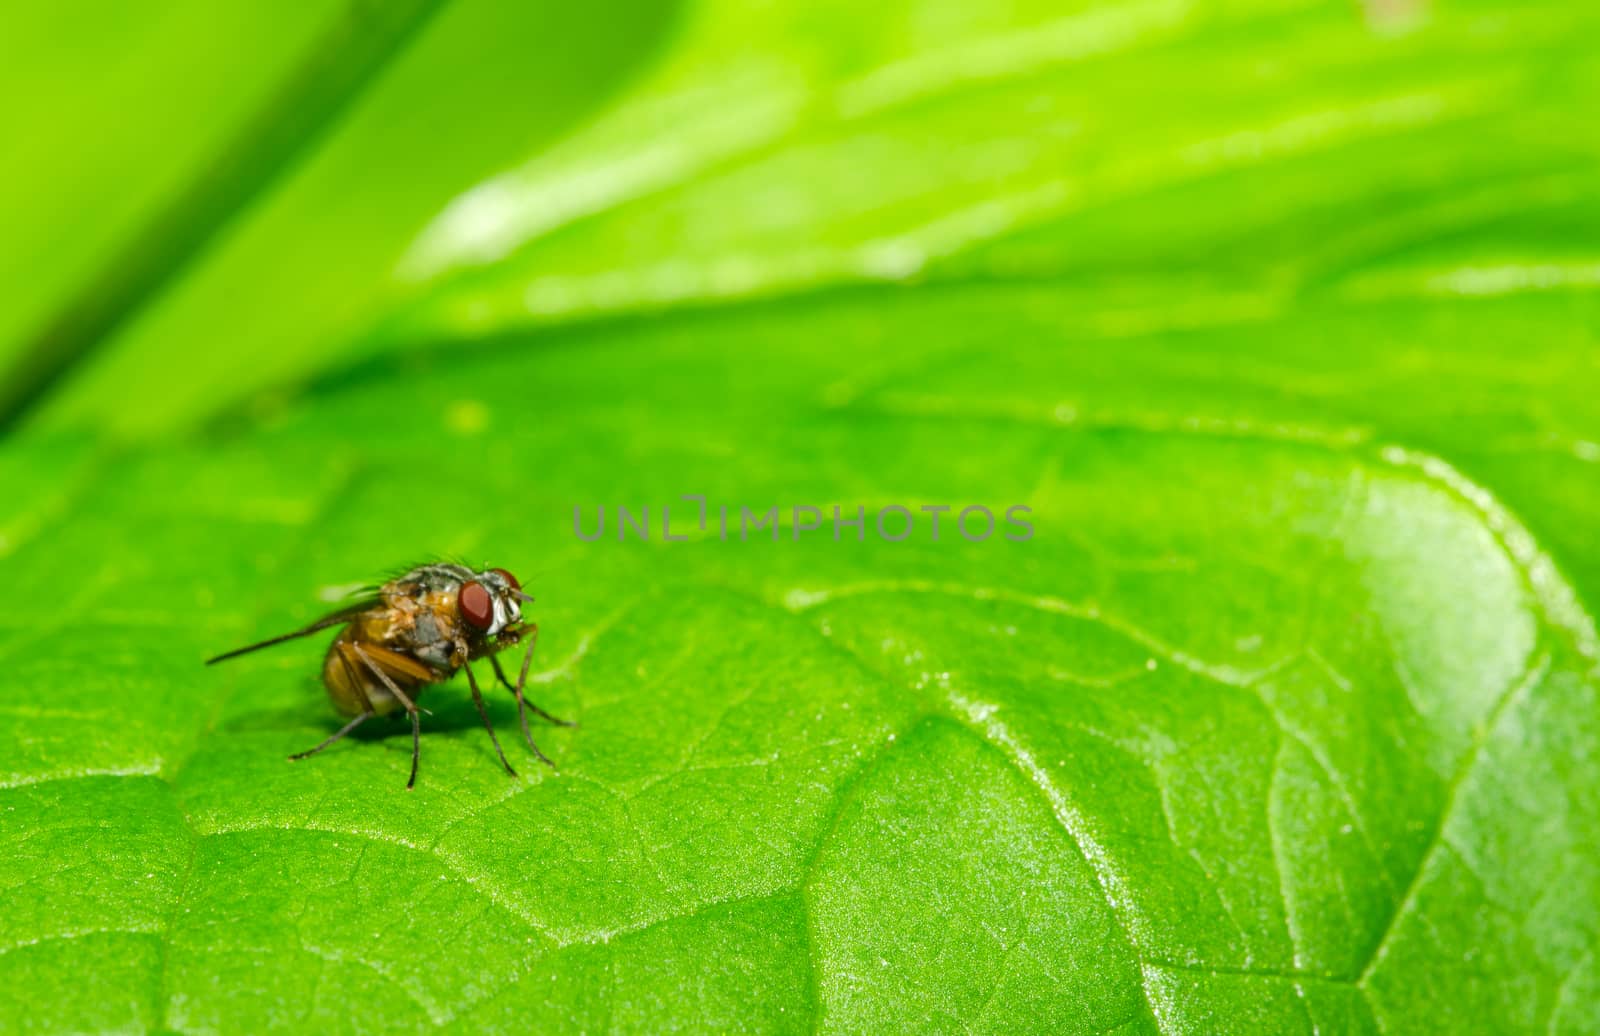 Fly on the green leaf, blurred background.